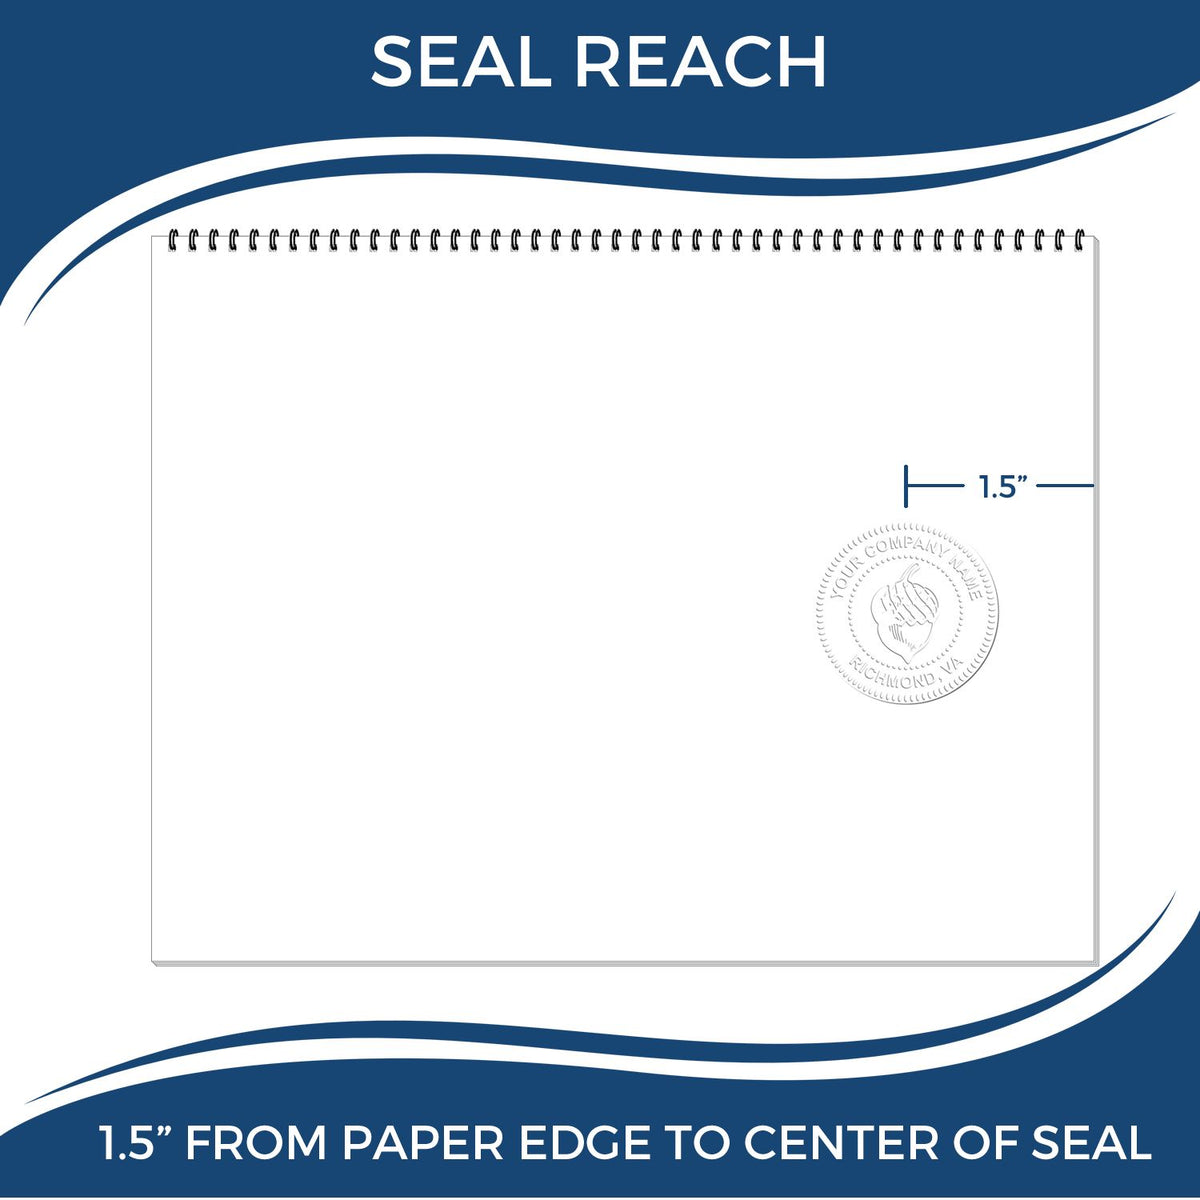 An infographic showing the seal reach which is represented by a ruler and a miniature seal image of the Hybrid Vermont Engineer Seal